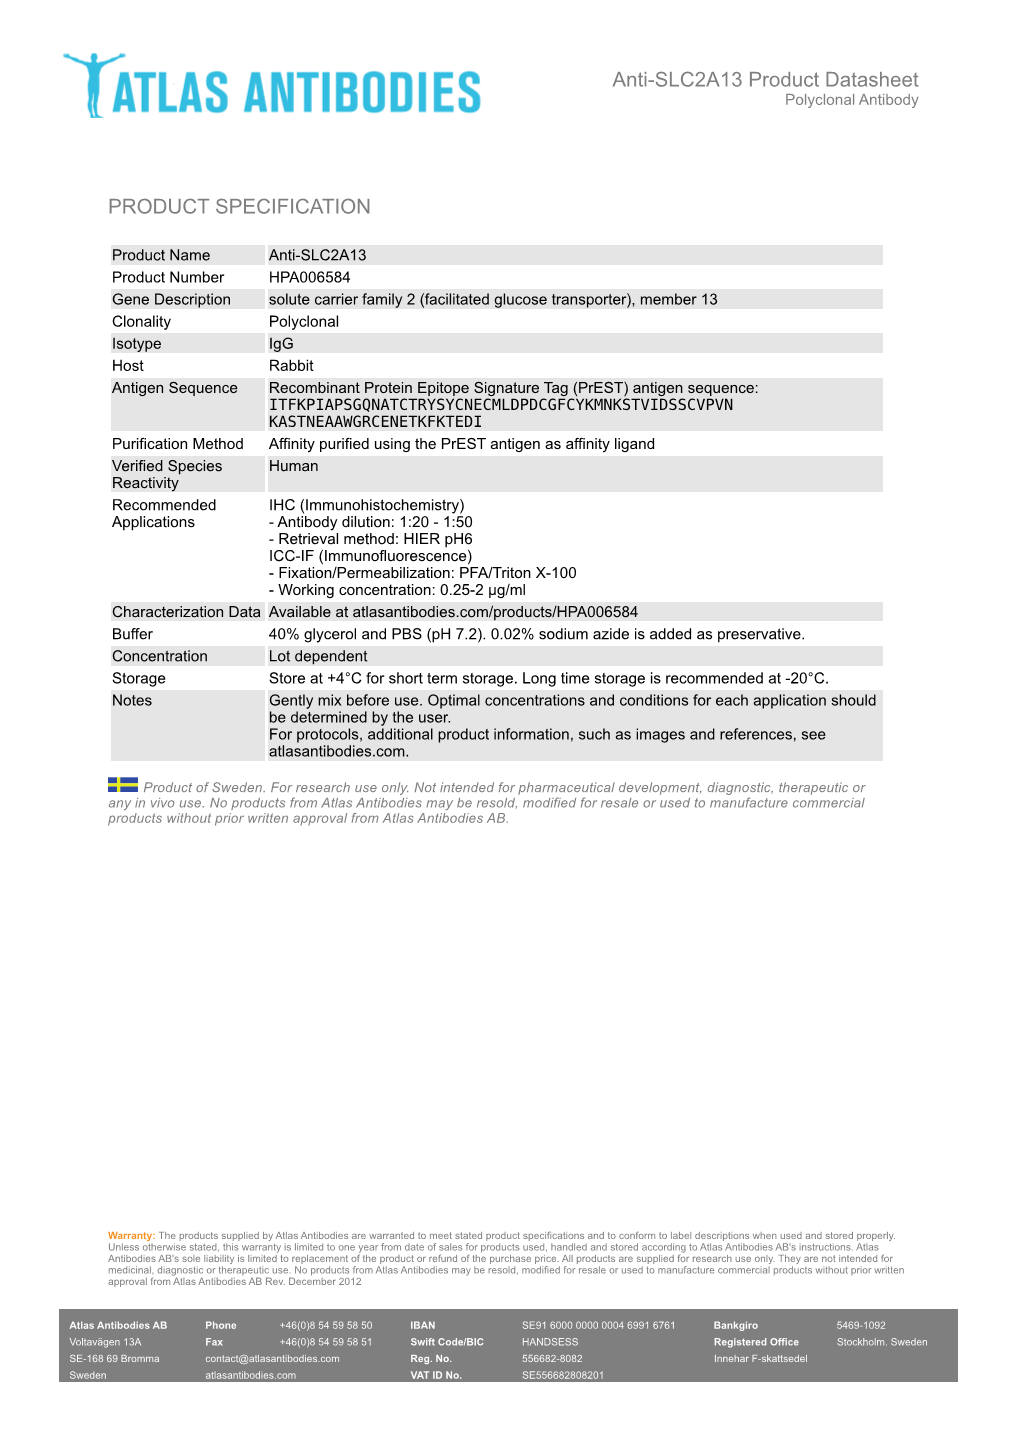 PRODUCT SPECIFICATION Anti-SLC2A13 Product Datasheet